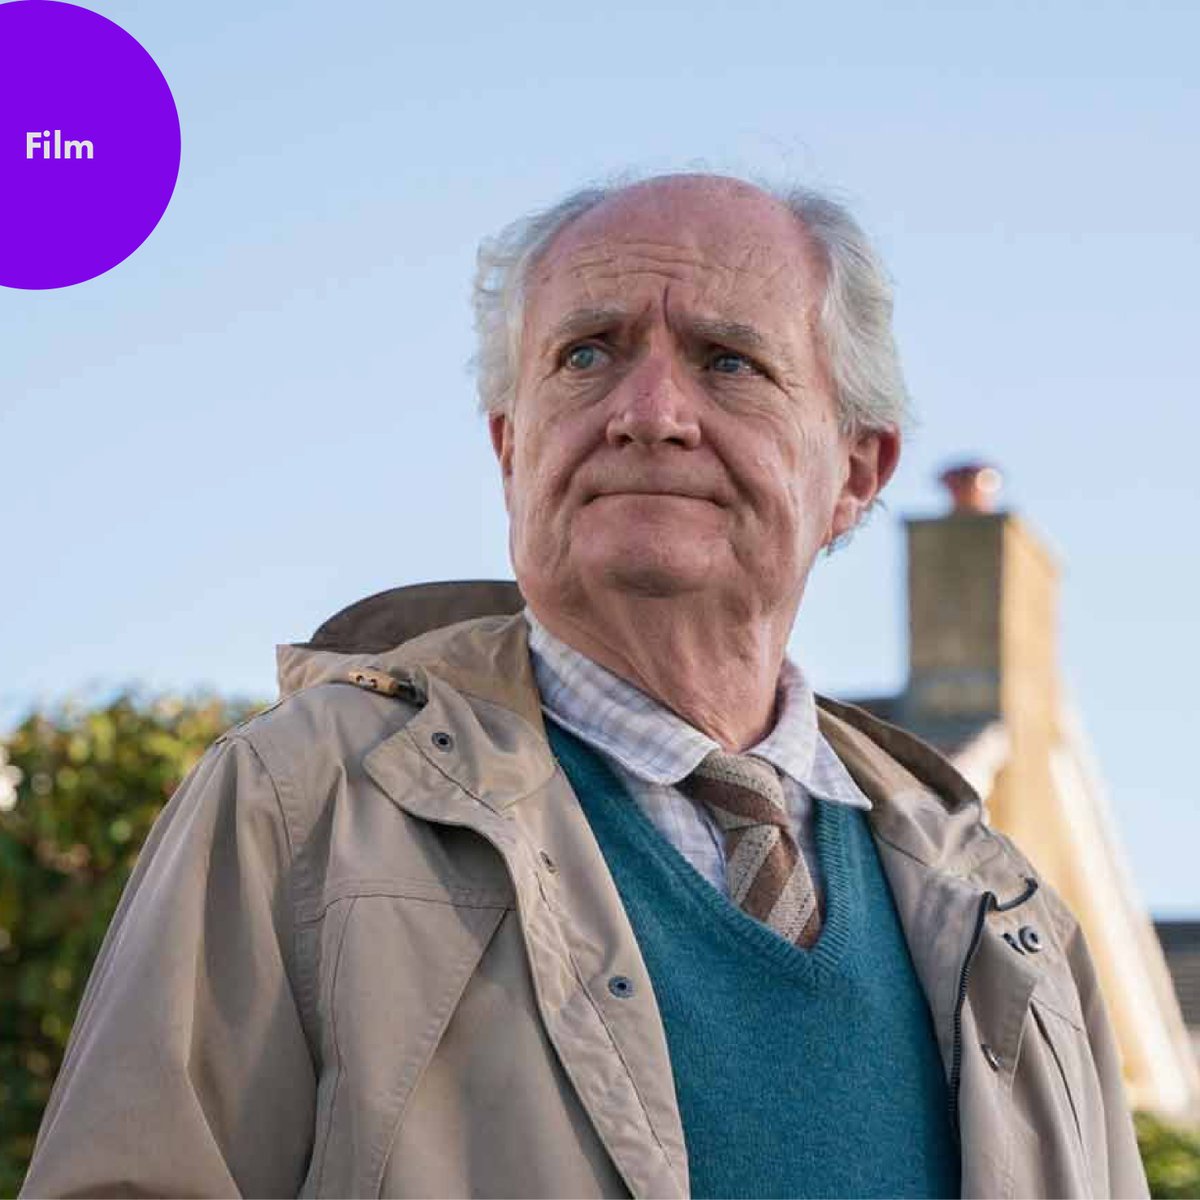 Follow retired pensioner, Harold on his adventure in the brilliant film: The Unlikely Pilgrimage of Harold Fry🚶 📅 Wednesday 23rd August, 7:30 PM 🎟 Tickets £6.00 (General) £5.00 (Concession/Member) He receives a letter from an old friend that flips his life upside down.